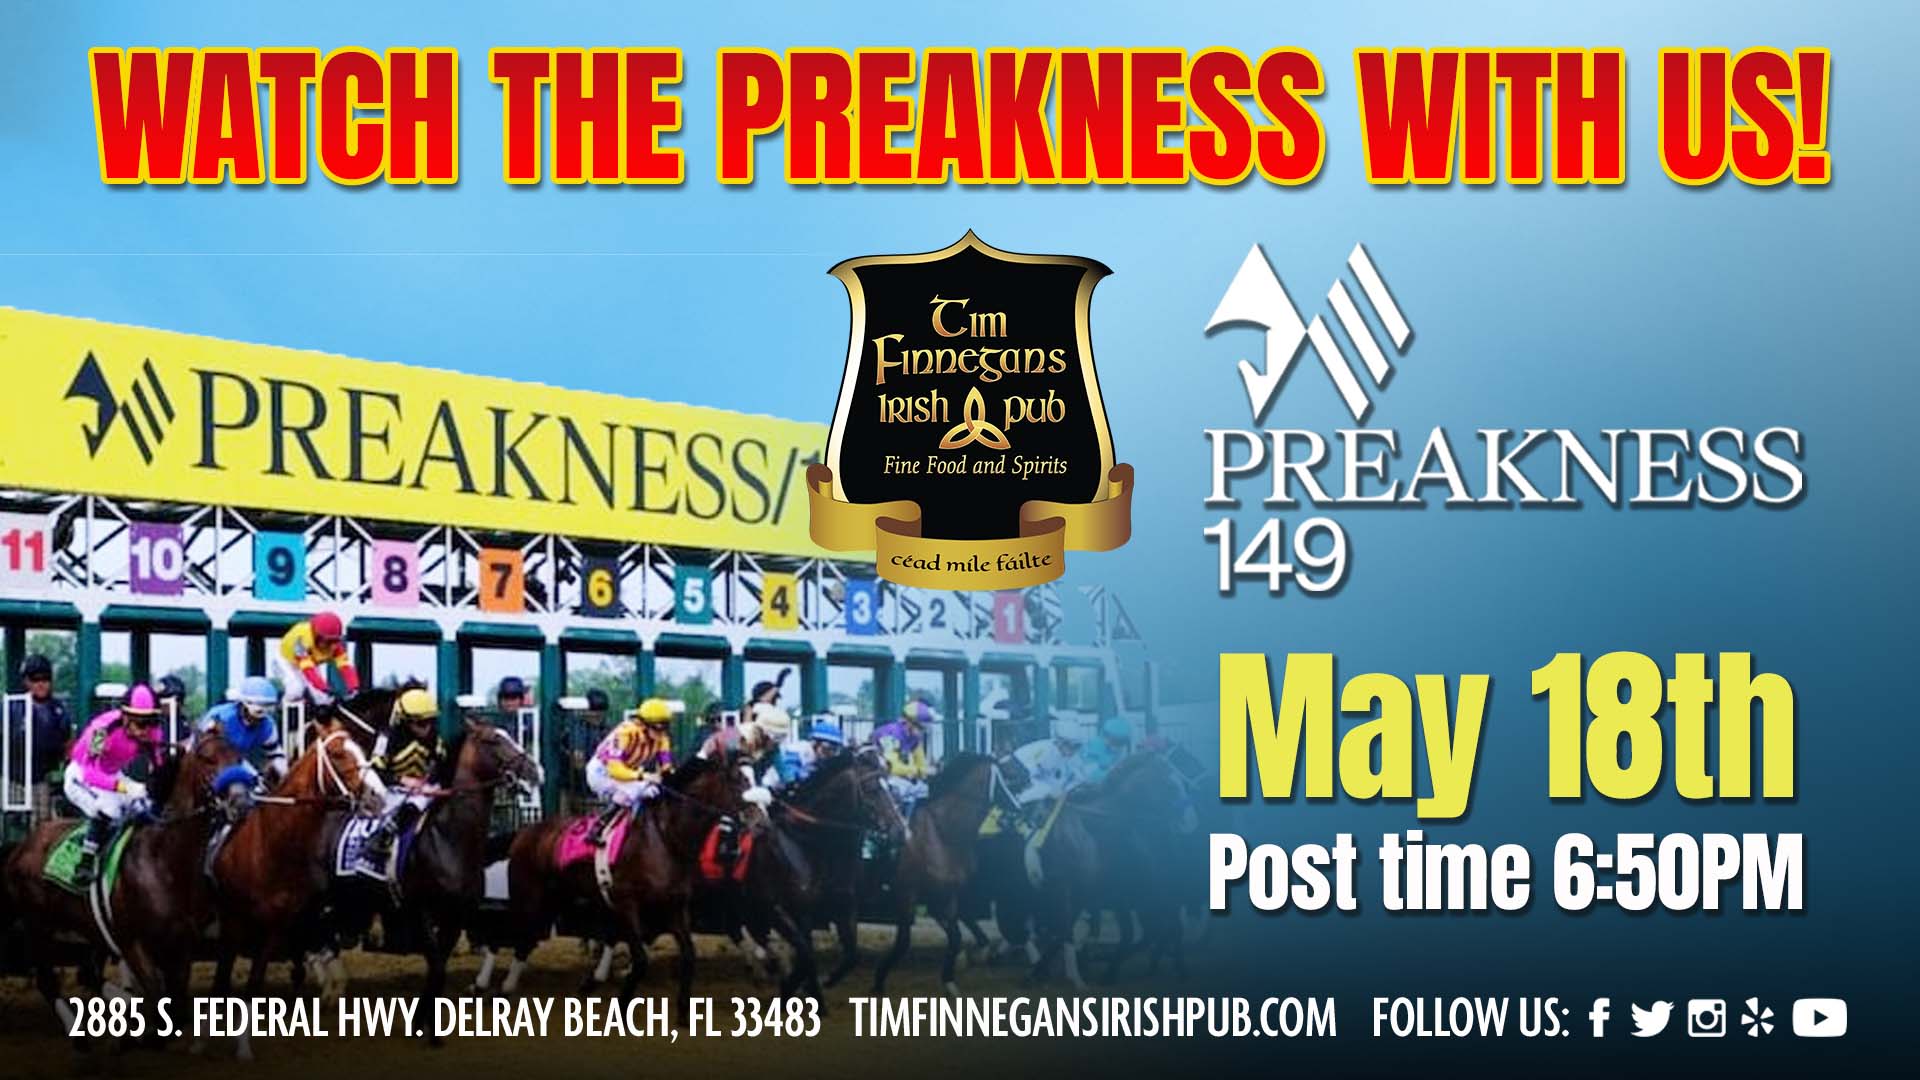 Preakness Stakes May 18th - Post Time 6:50PM